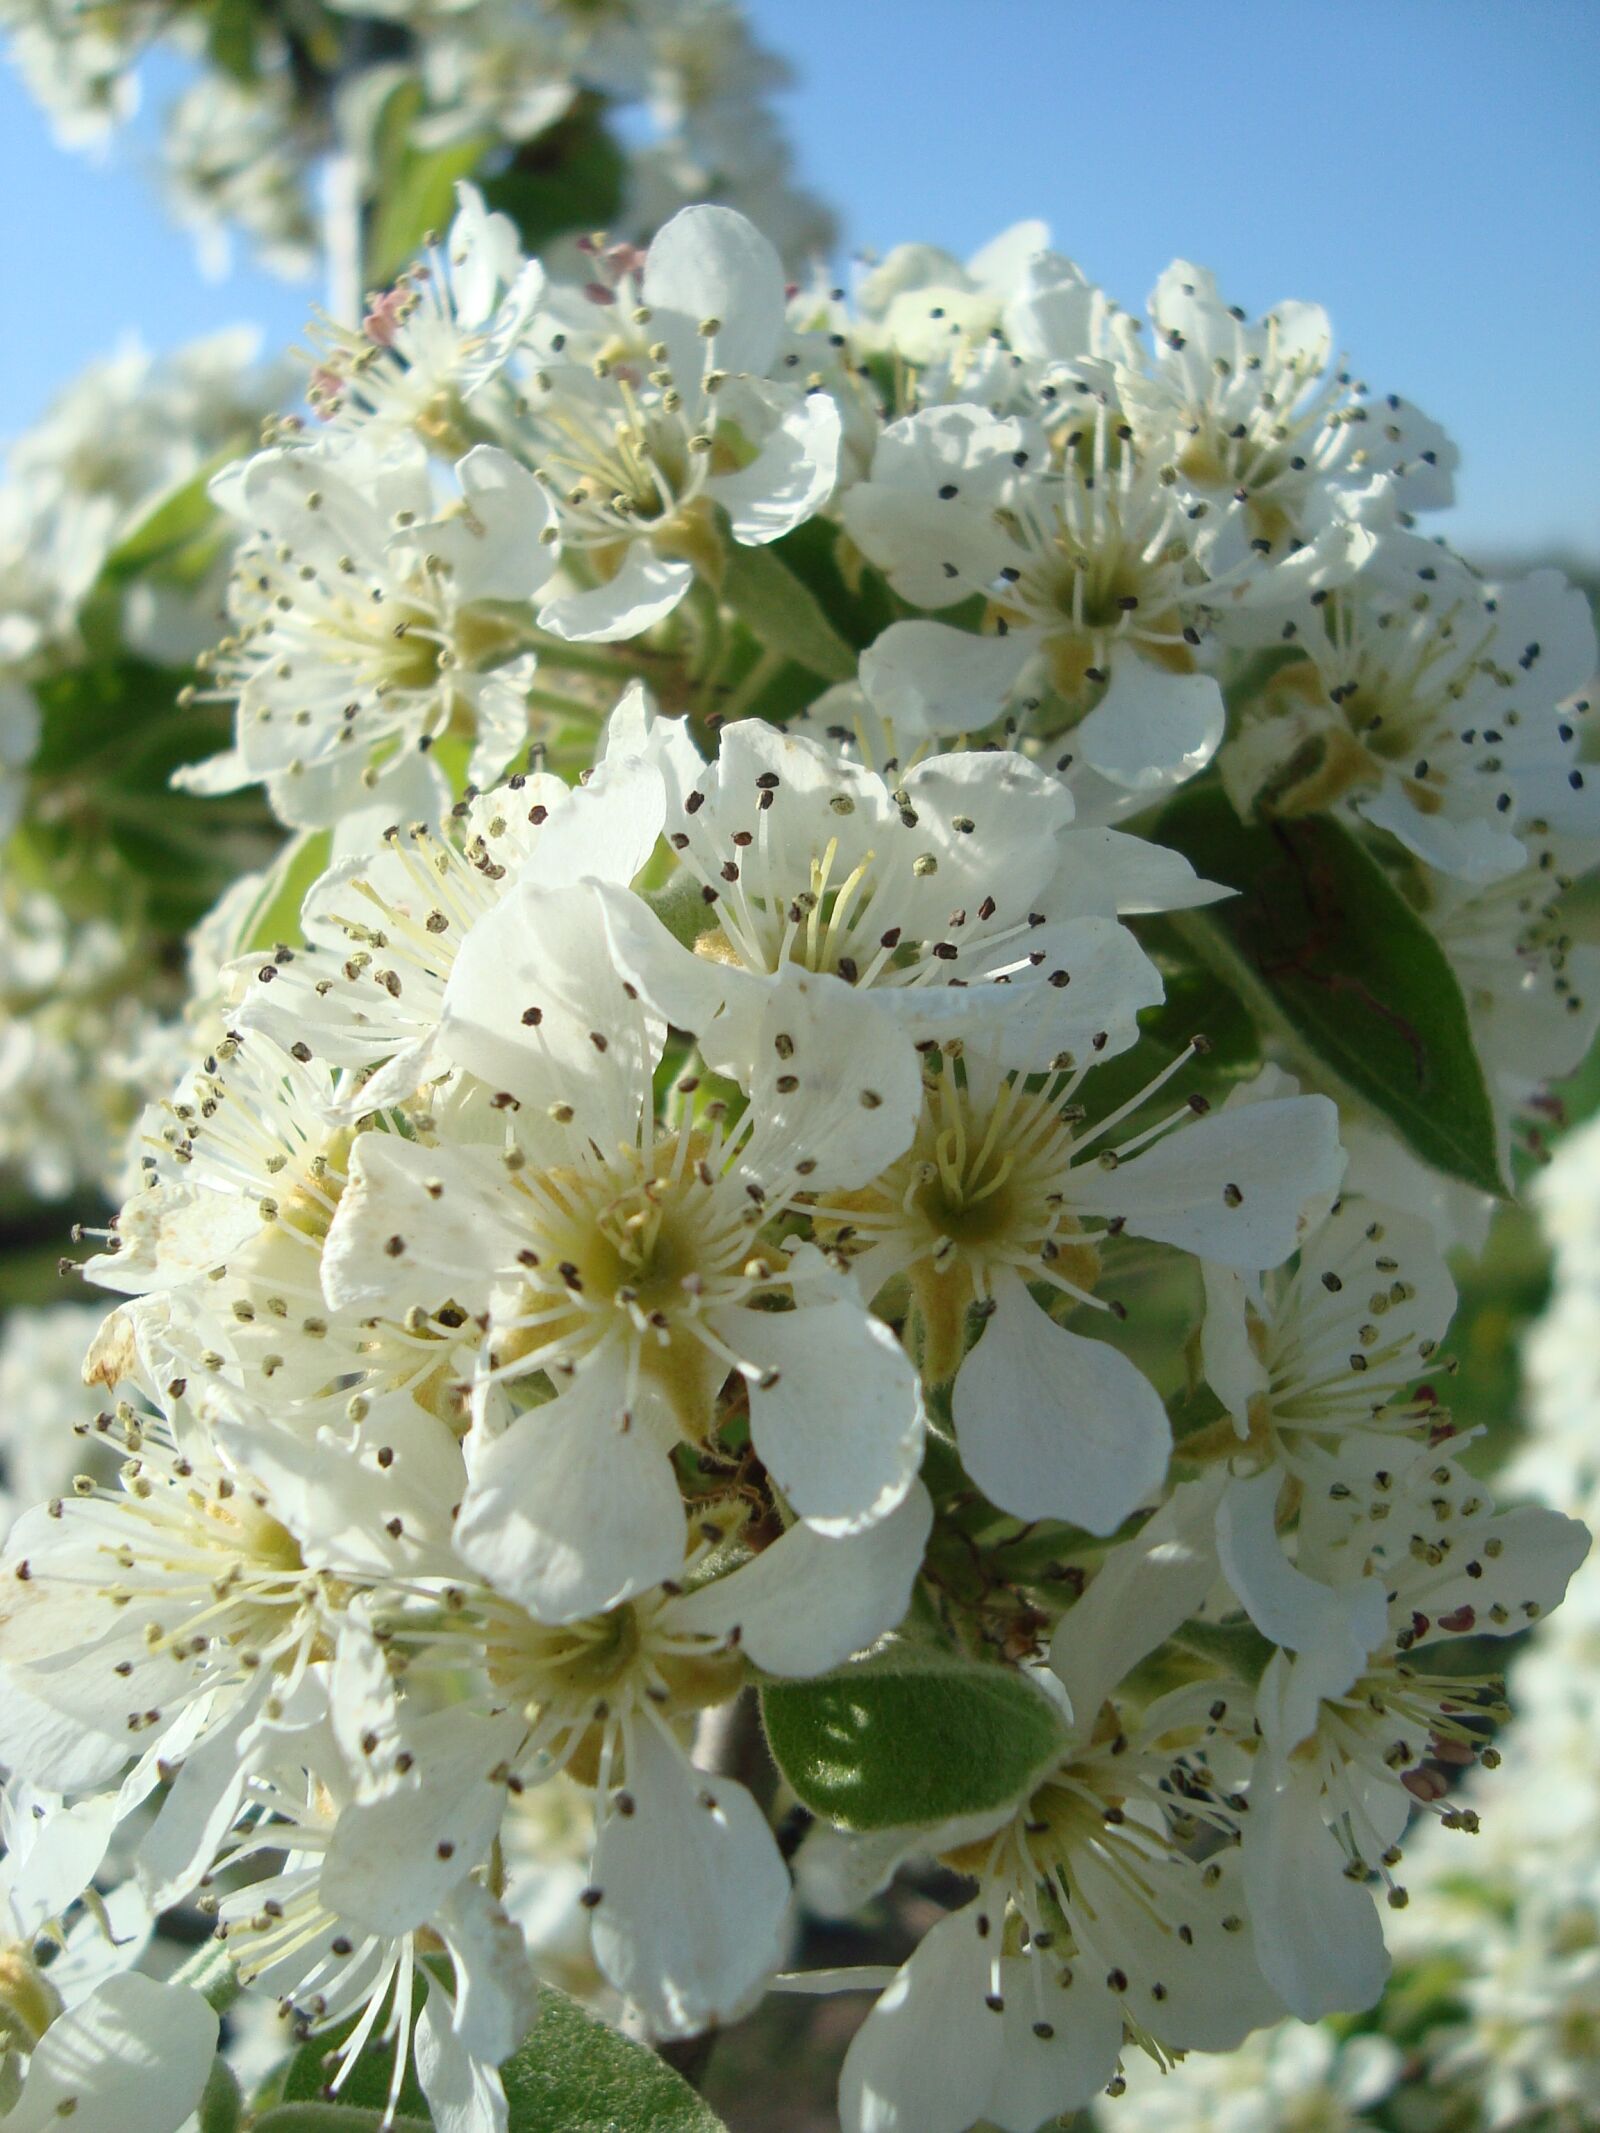 Sony Cyber-shot DSC-W120 sample photo. Pear blossom, pear, blossom photography